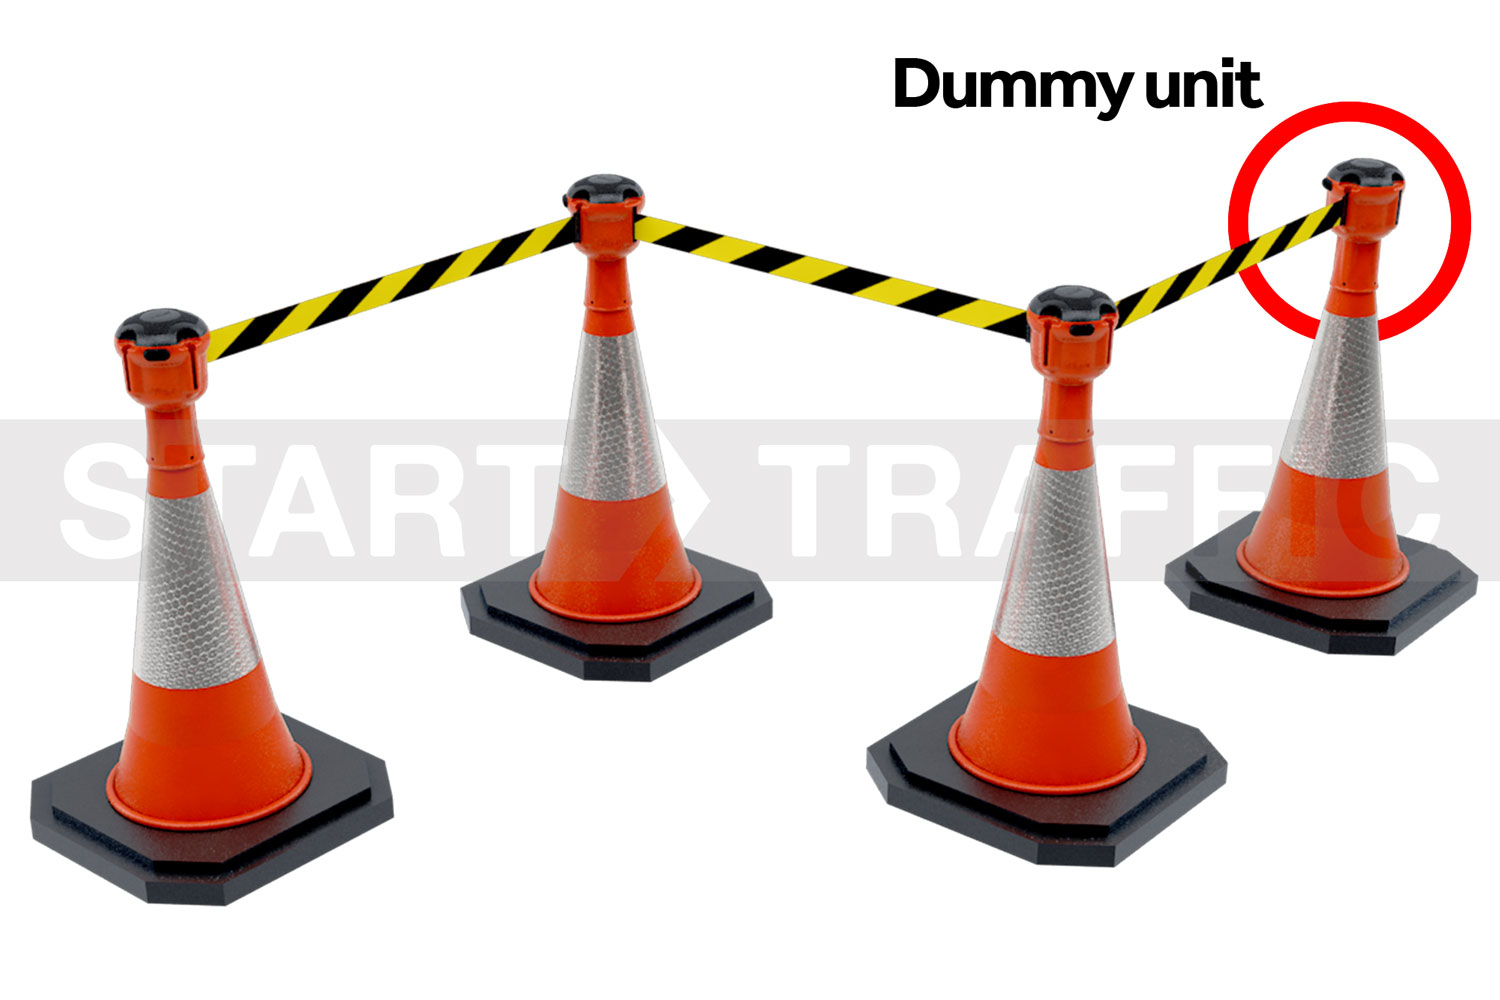 Skipper dummy unit being used with cones